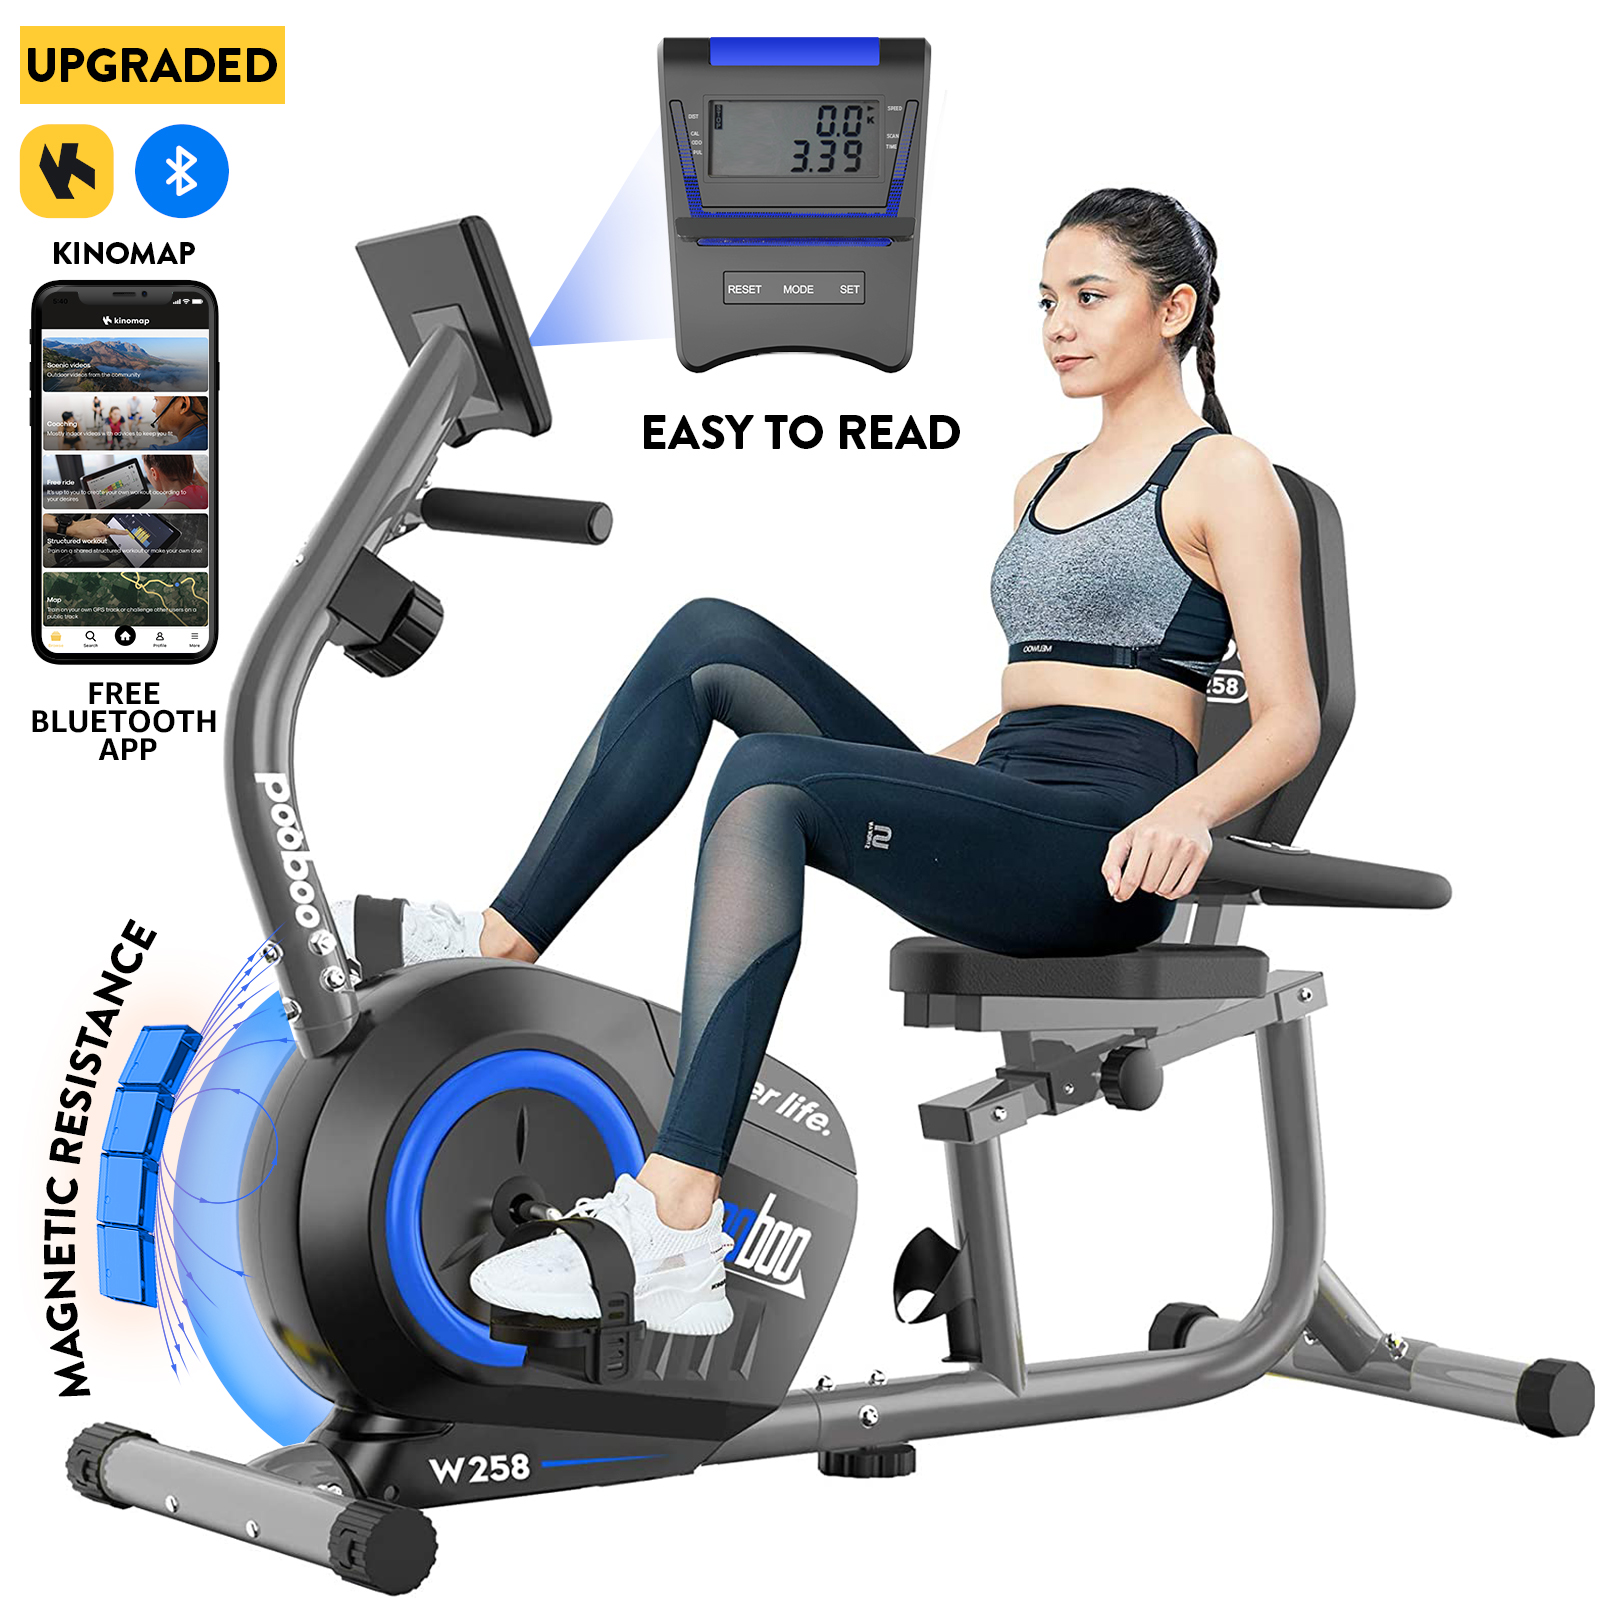 Pooboo Recumbent Exercise Bikes Sit Down Stationary Bicycle Magnetic Resistance Indoor Cycling Bike 380lb - image 2 of 16